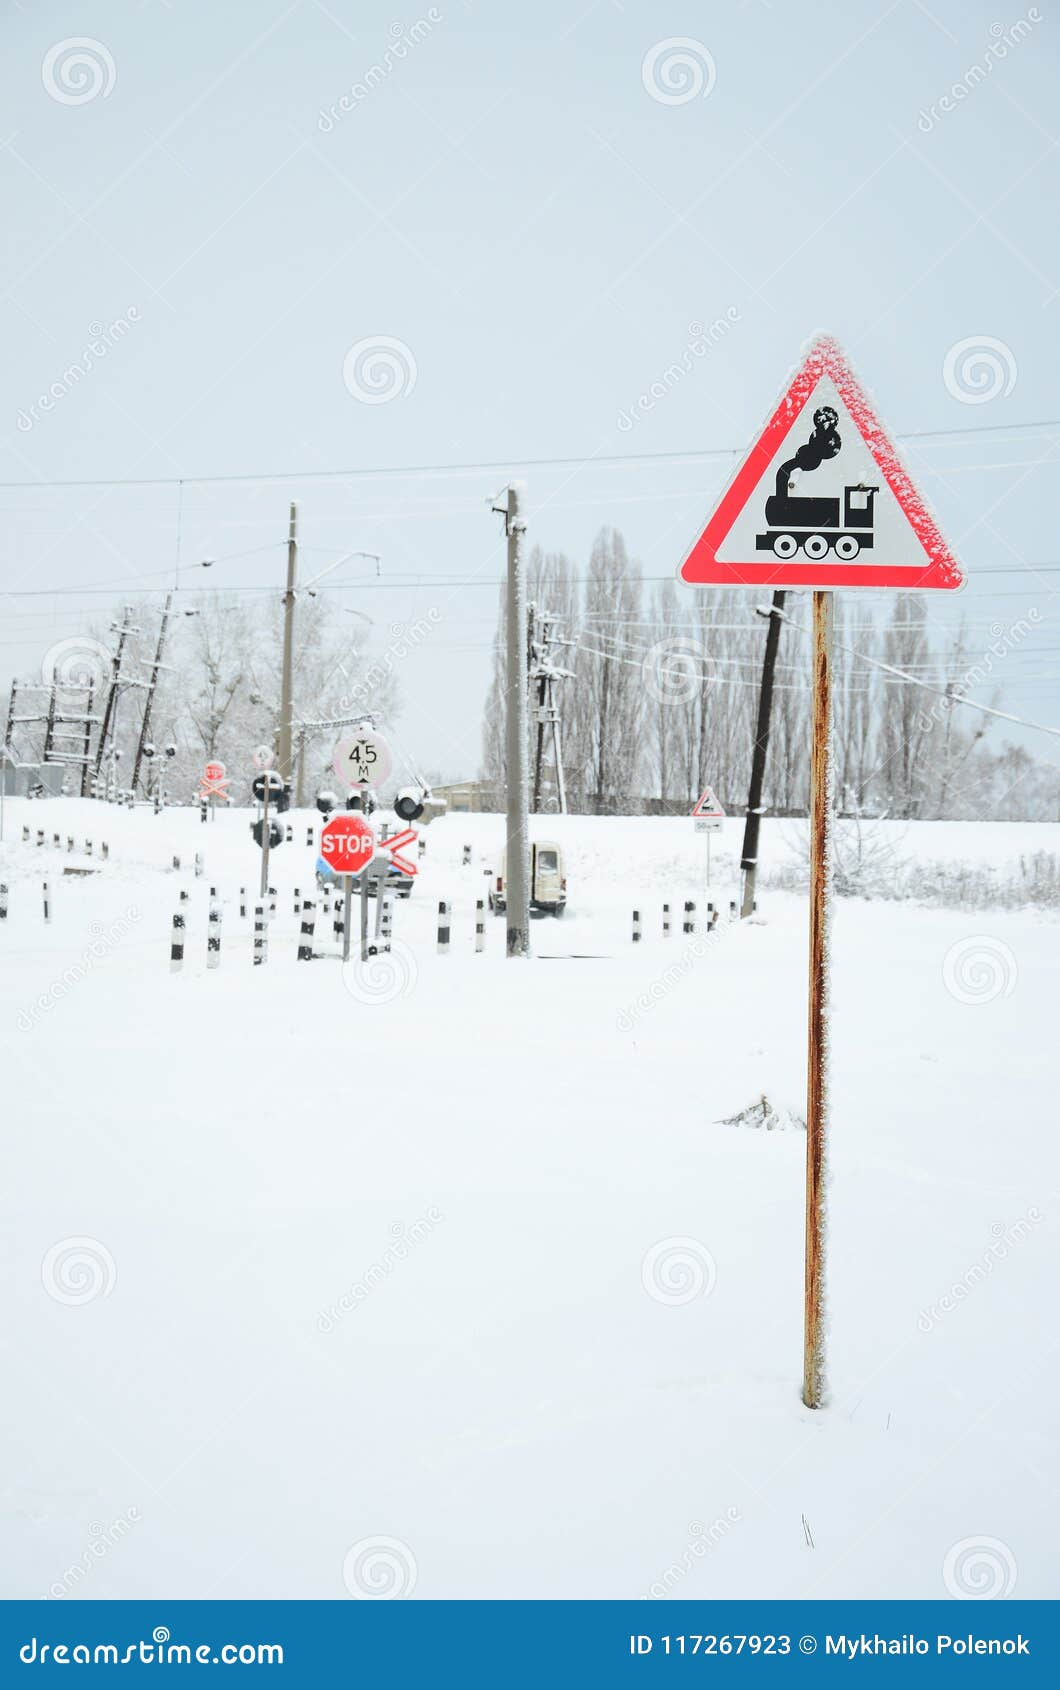 Railway Crossing Without A Barrier With A Lot Of Warning Signs In The Snowy Winter Season Stock Image Image Of Railroad Equipment